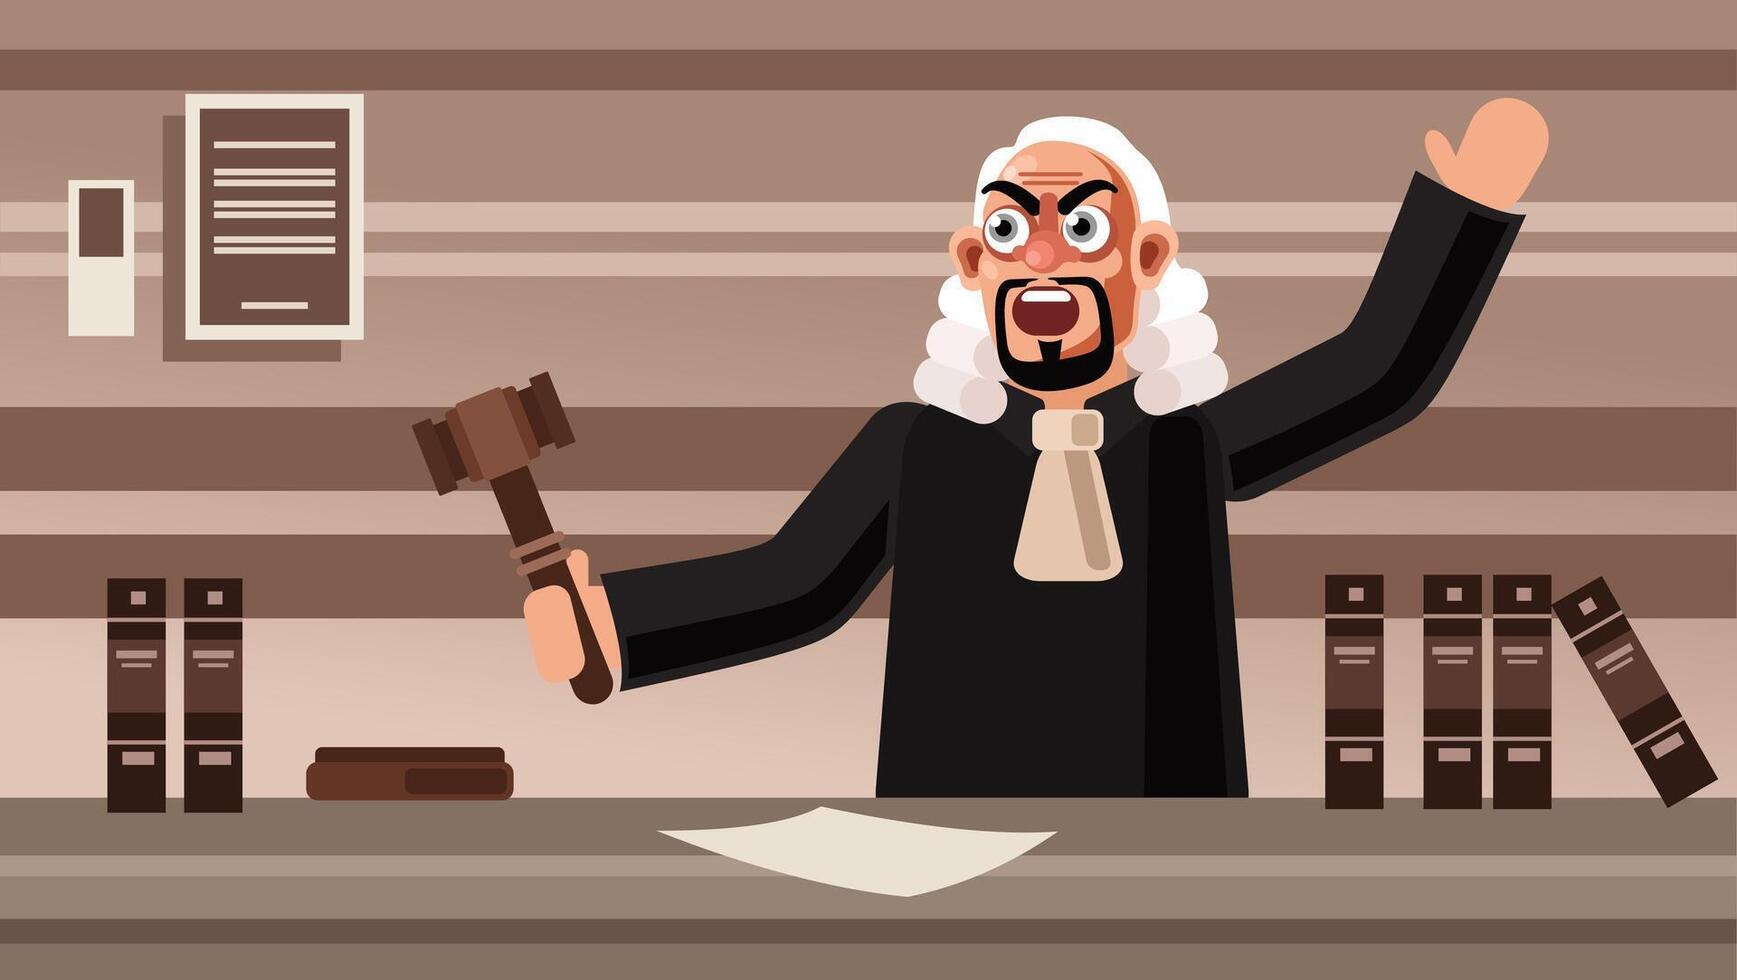 Angry Judge Character Vector Illustration